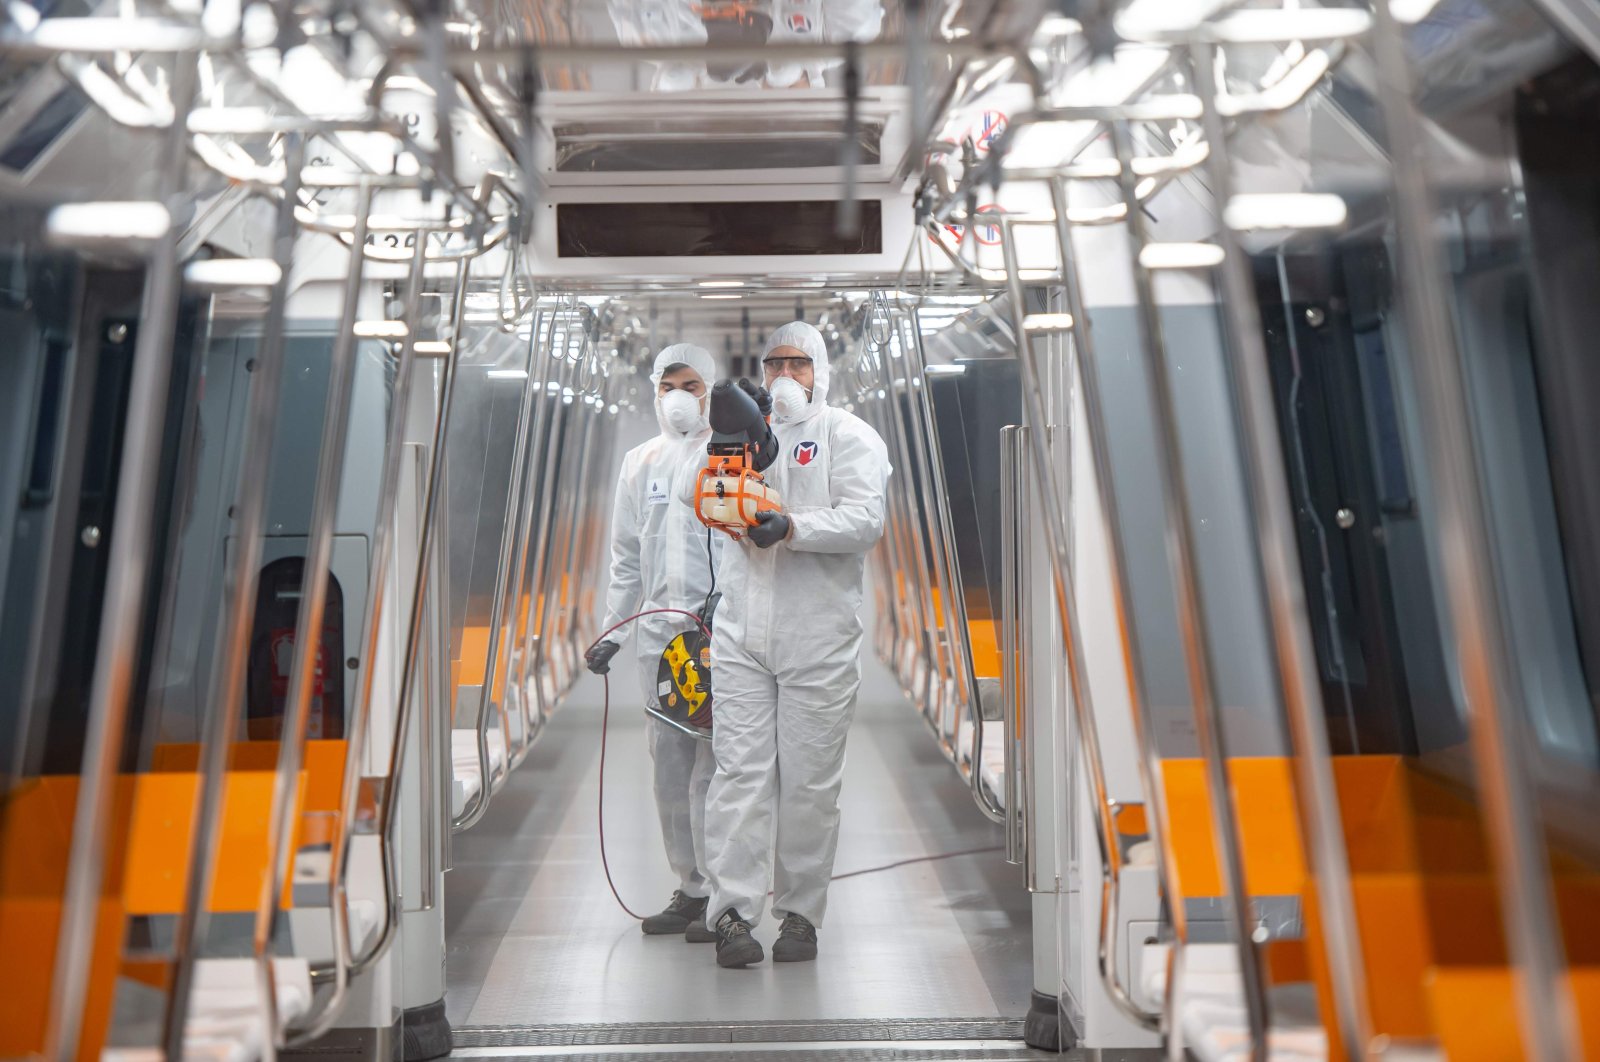 Employees of the Istanbul Municipality wearing protective gear disinfects a subway carriage to prevent the spread of the COVID-19 in Istanbul, March 12, 2020. (AFP Photo)